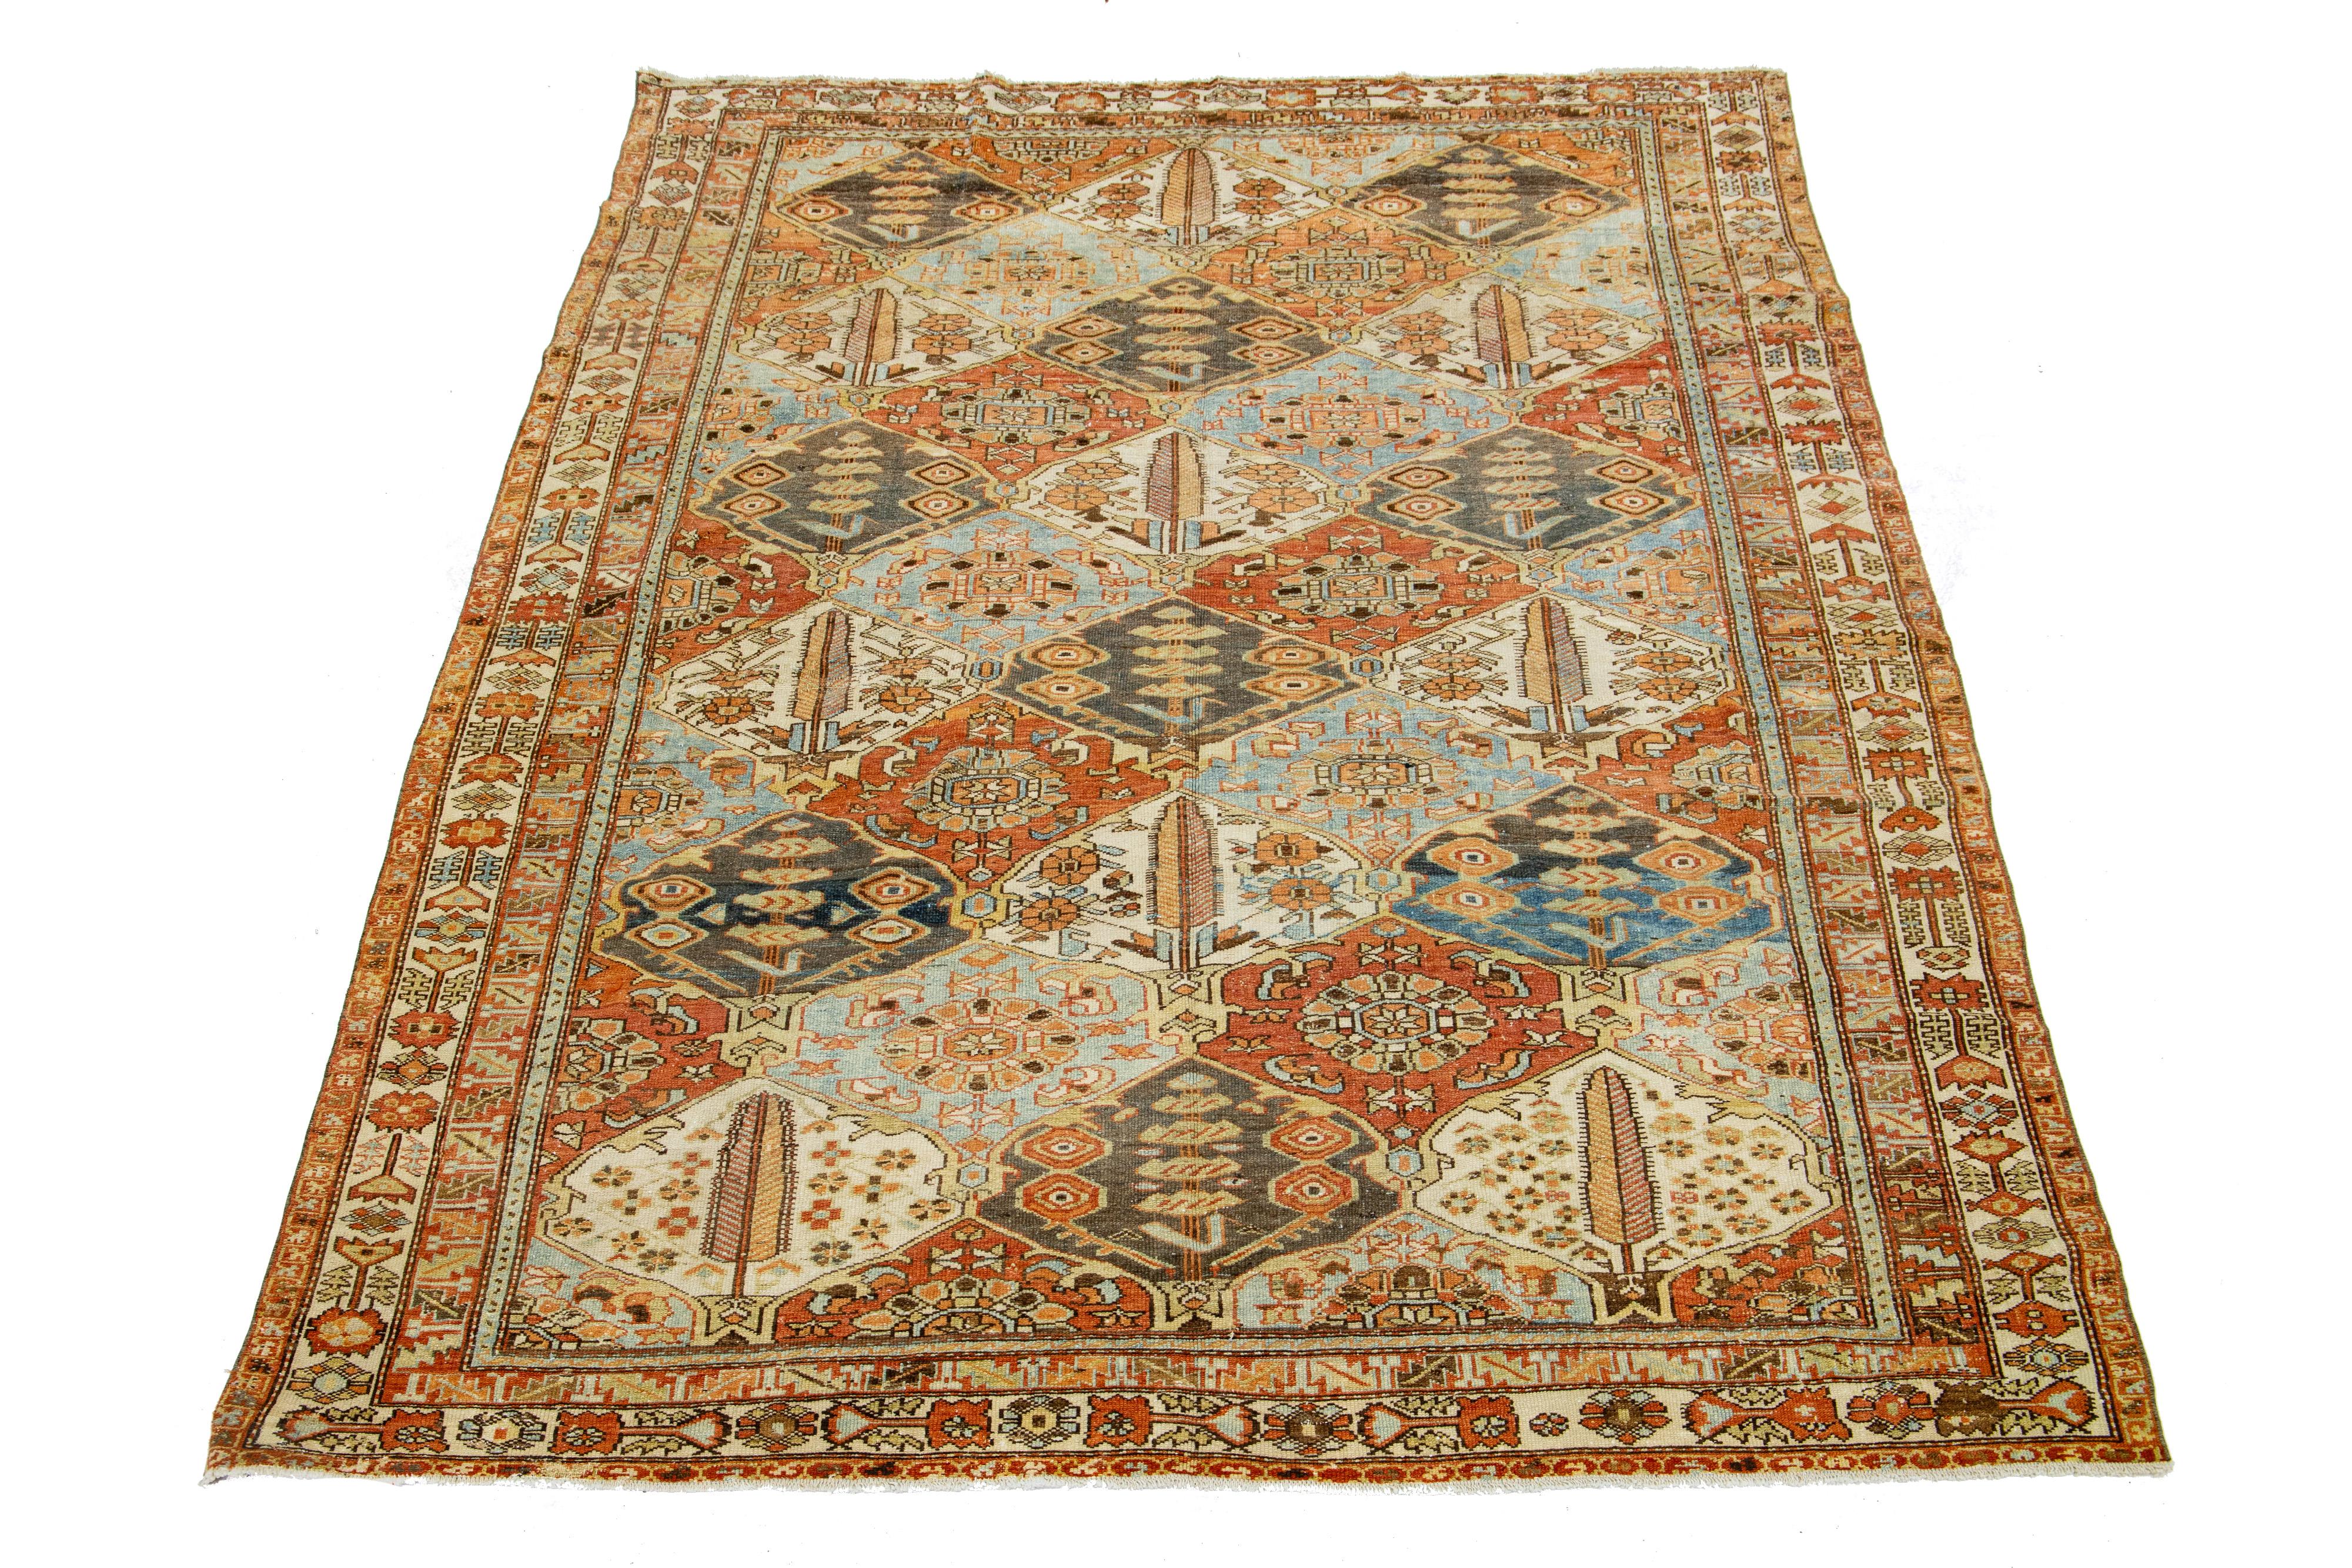 Beautiful Antique Bakhtiari hand-knotted wool rug with a rust color field. This Persian piece has a classic geometric floral design in blue and beige colors.

This rug measures 6'10